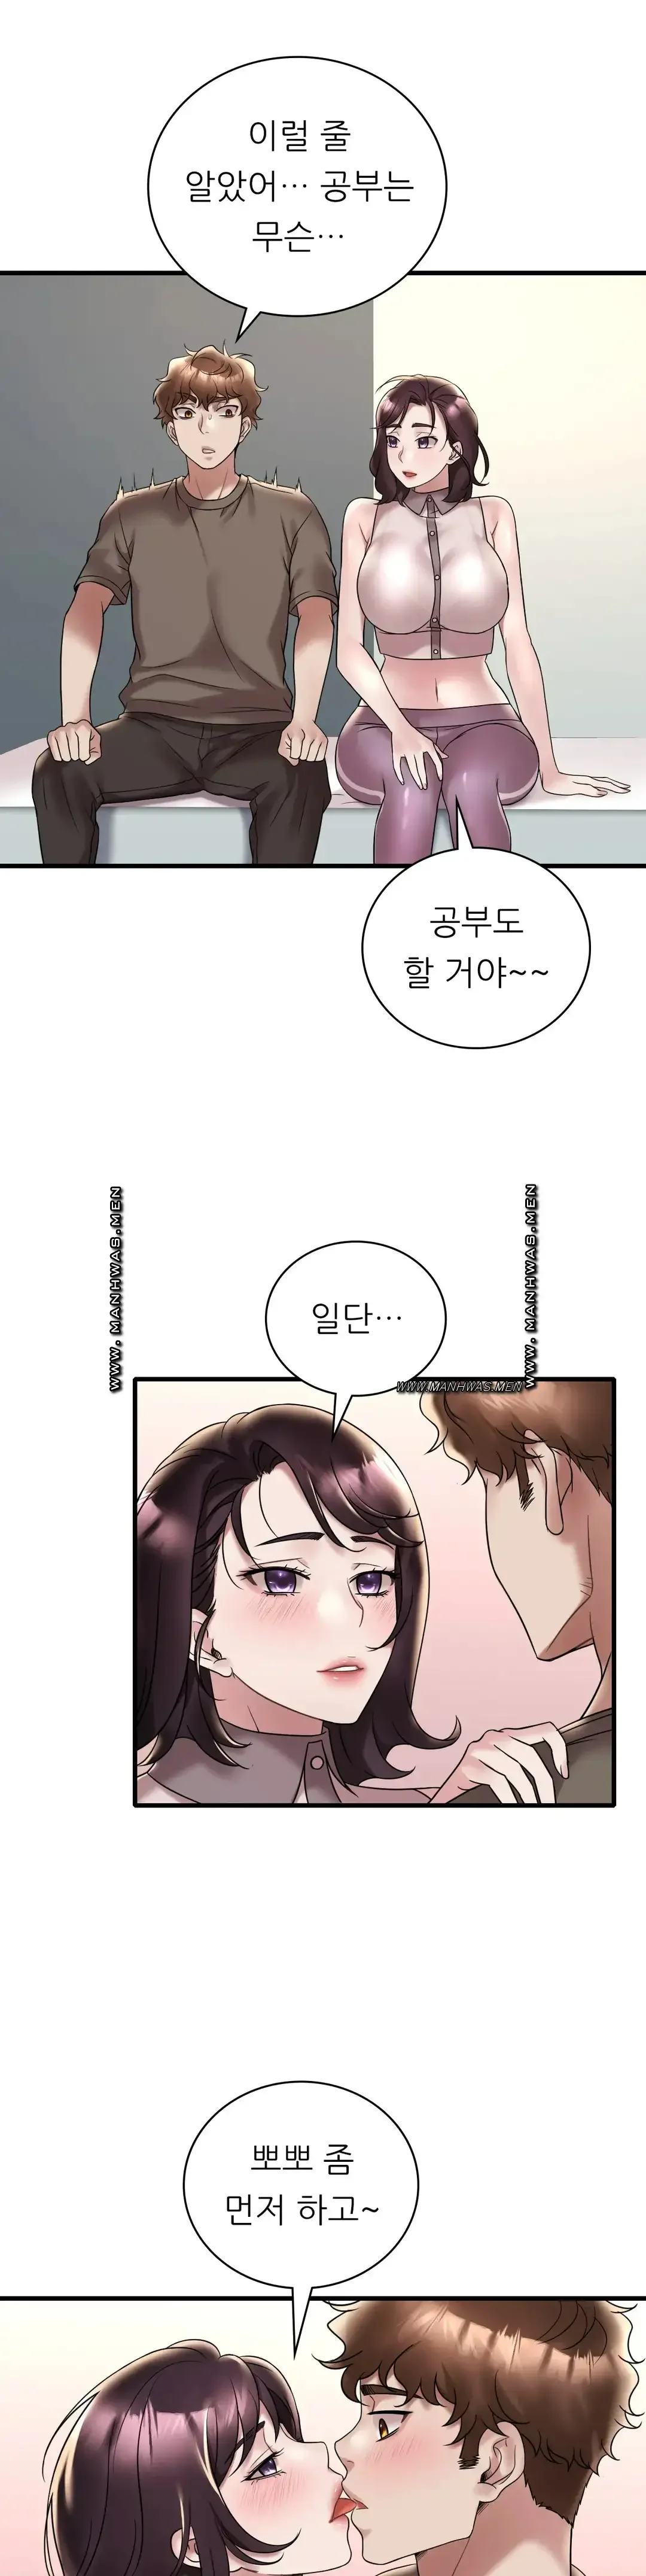 she-wants-to-get-drunk-raw-chap-34-4